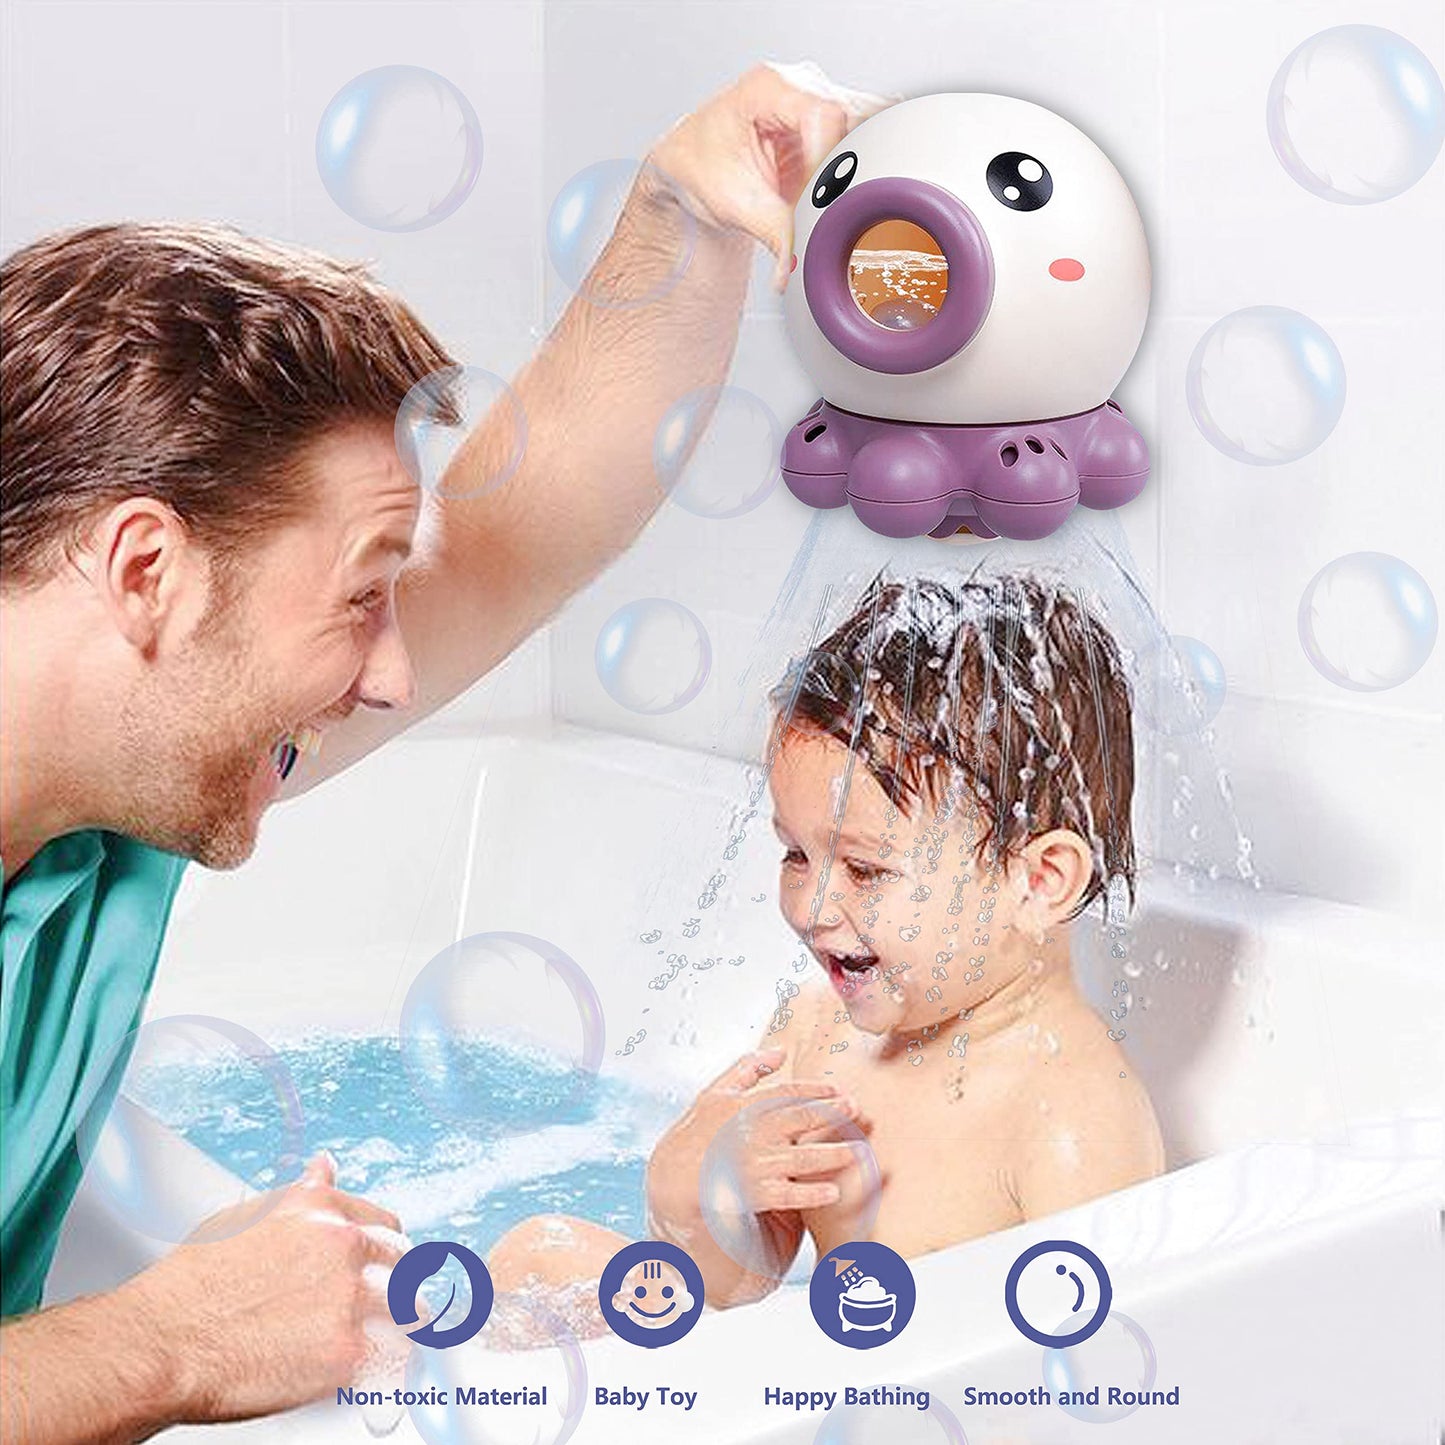 Octopus Fountain Bath Toy Water Jet Rotating Shower Bathroom Toy Summer Water Toys Sprinkler Beach Toys Kids Water Toys